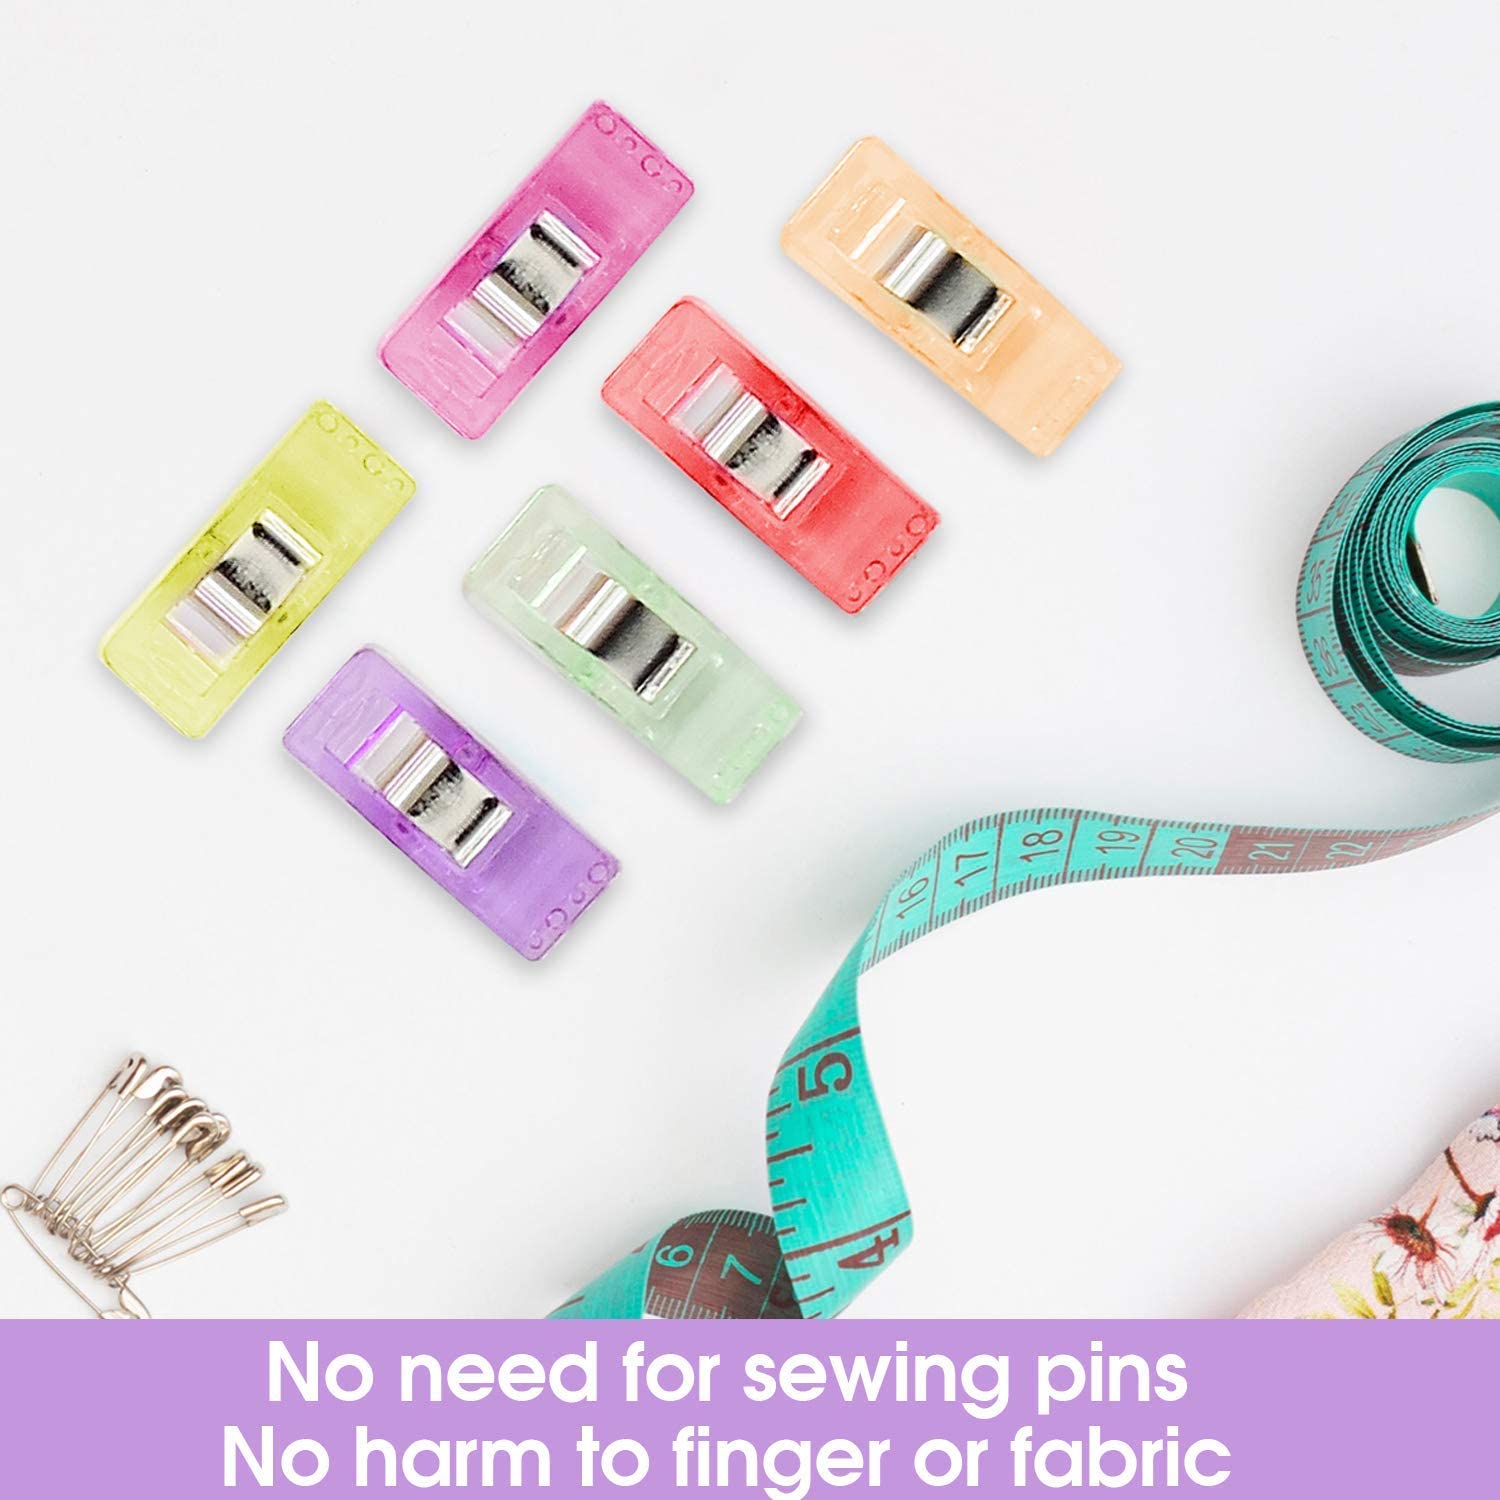 20pcs Large Plastic Sewing Clips, Fabric Clips, Sewing Craft Clip For  Quilting, Crochet, Knitting, Hanging Small Things (Random Color)